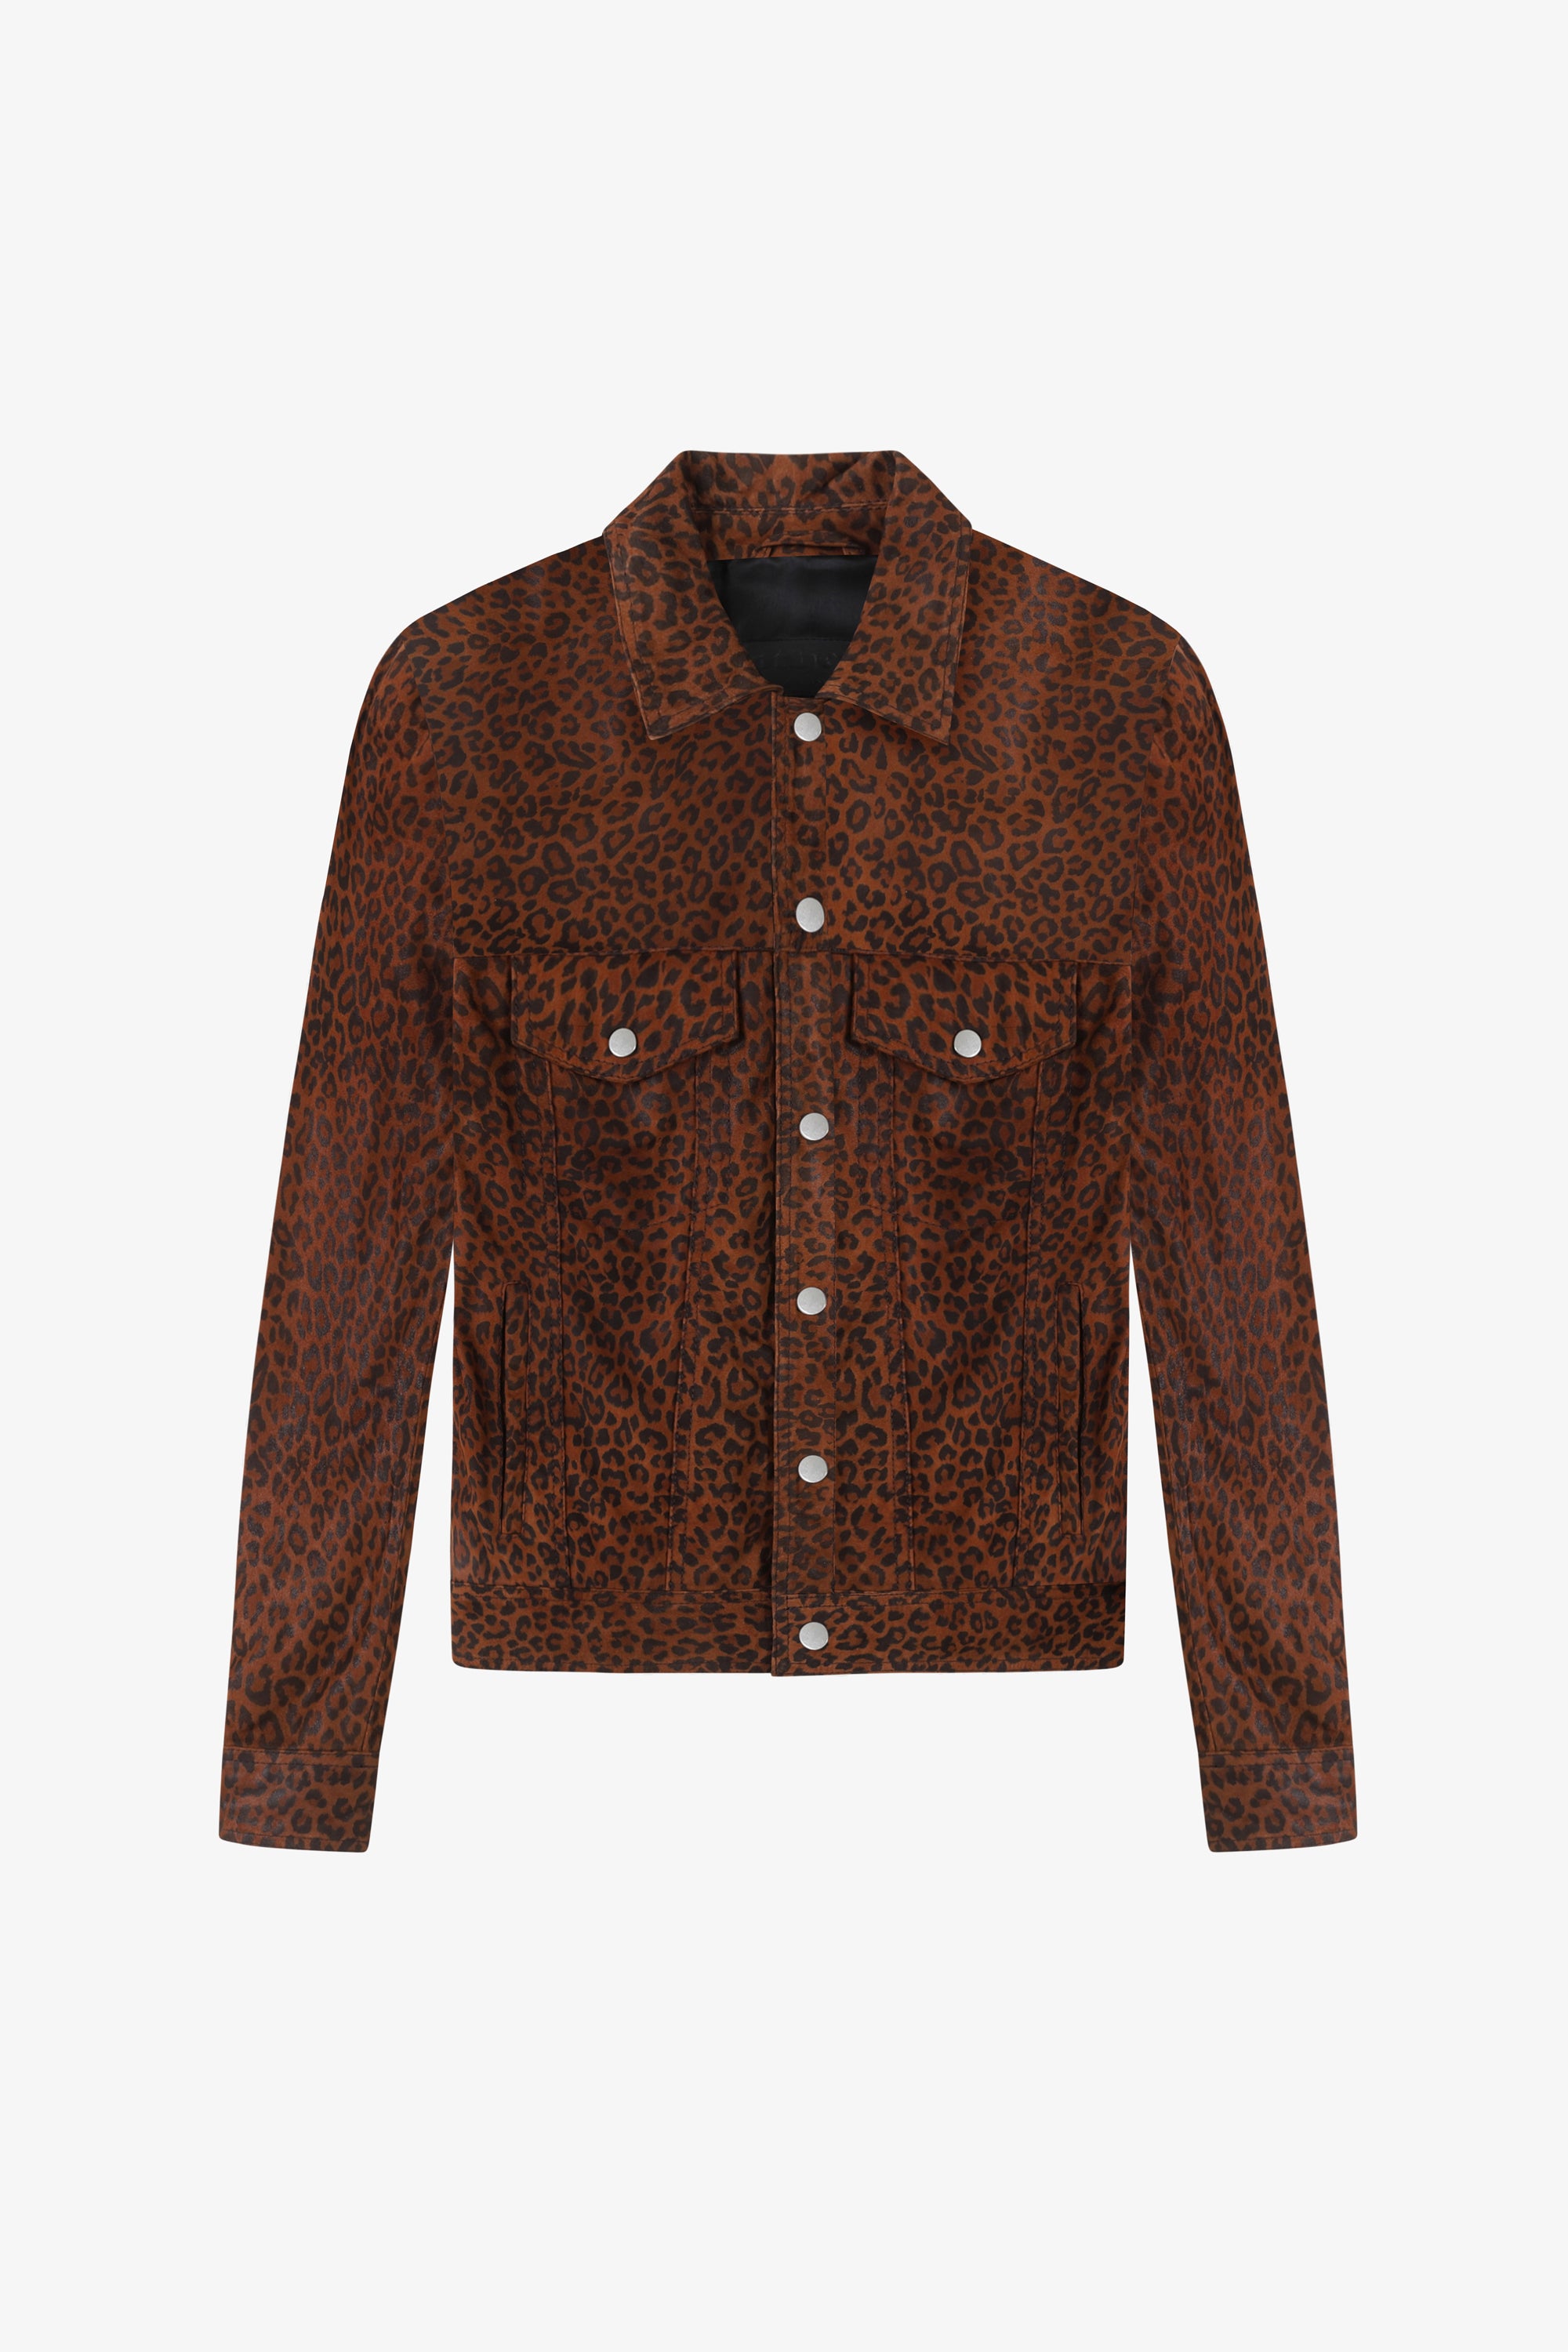 The Trucker Jacket | Leopard – OTHER